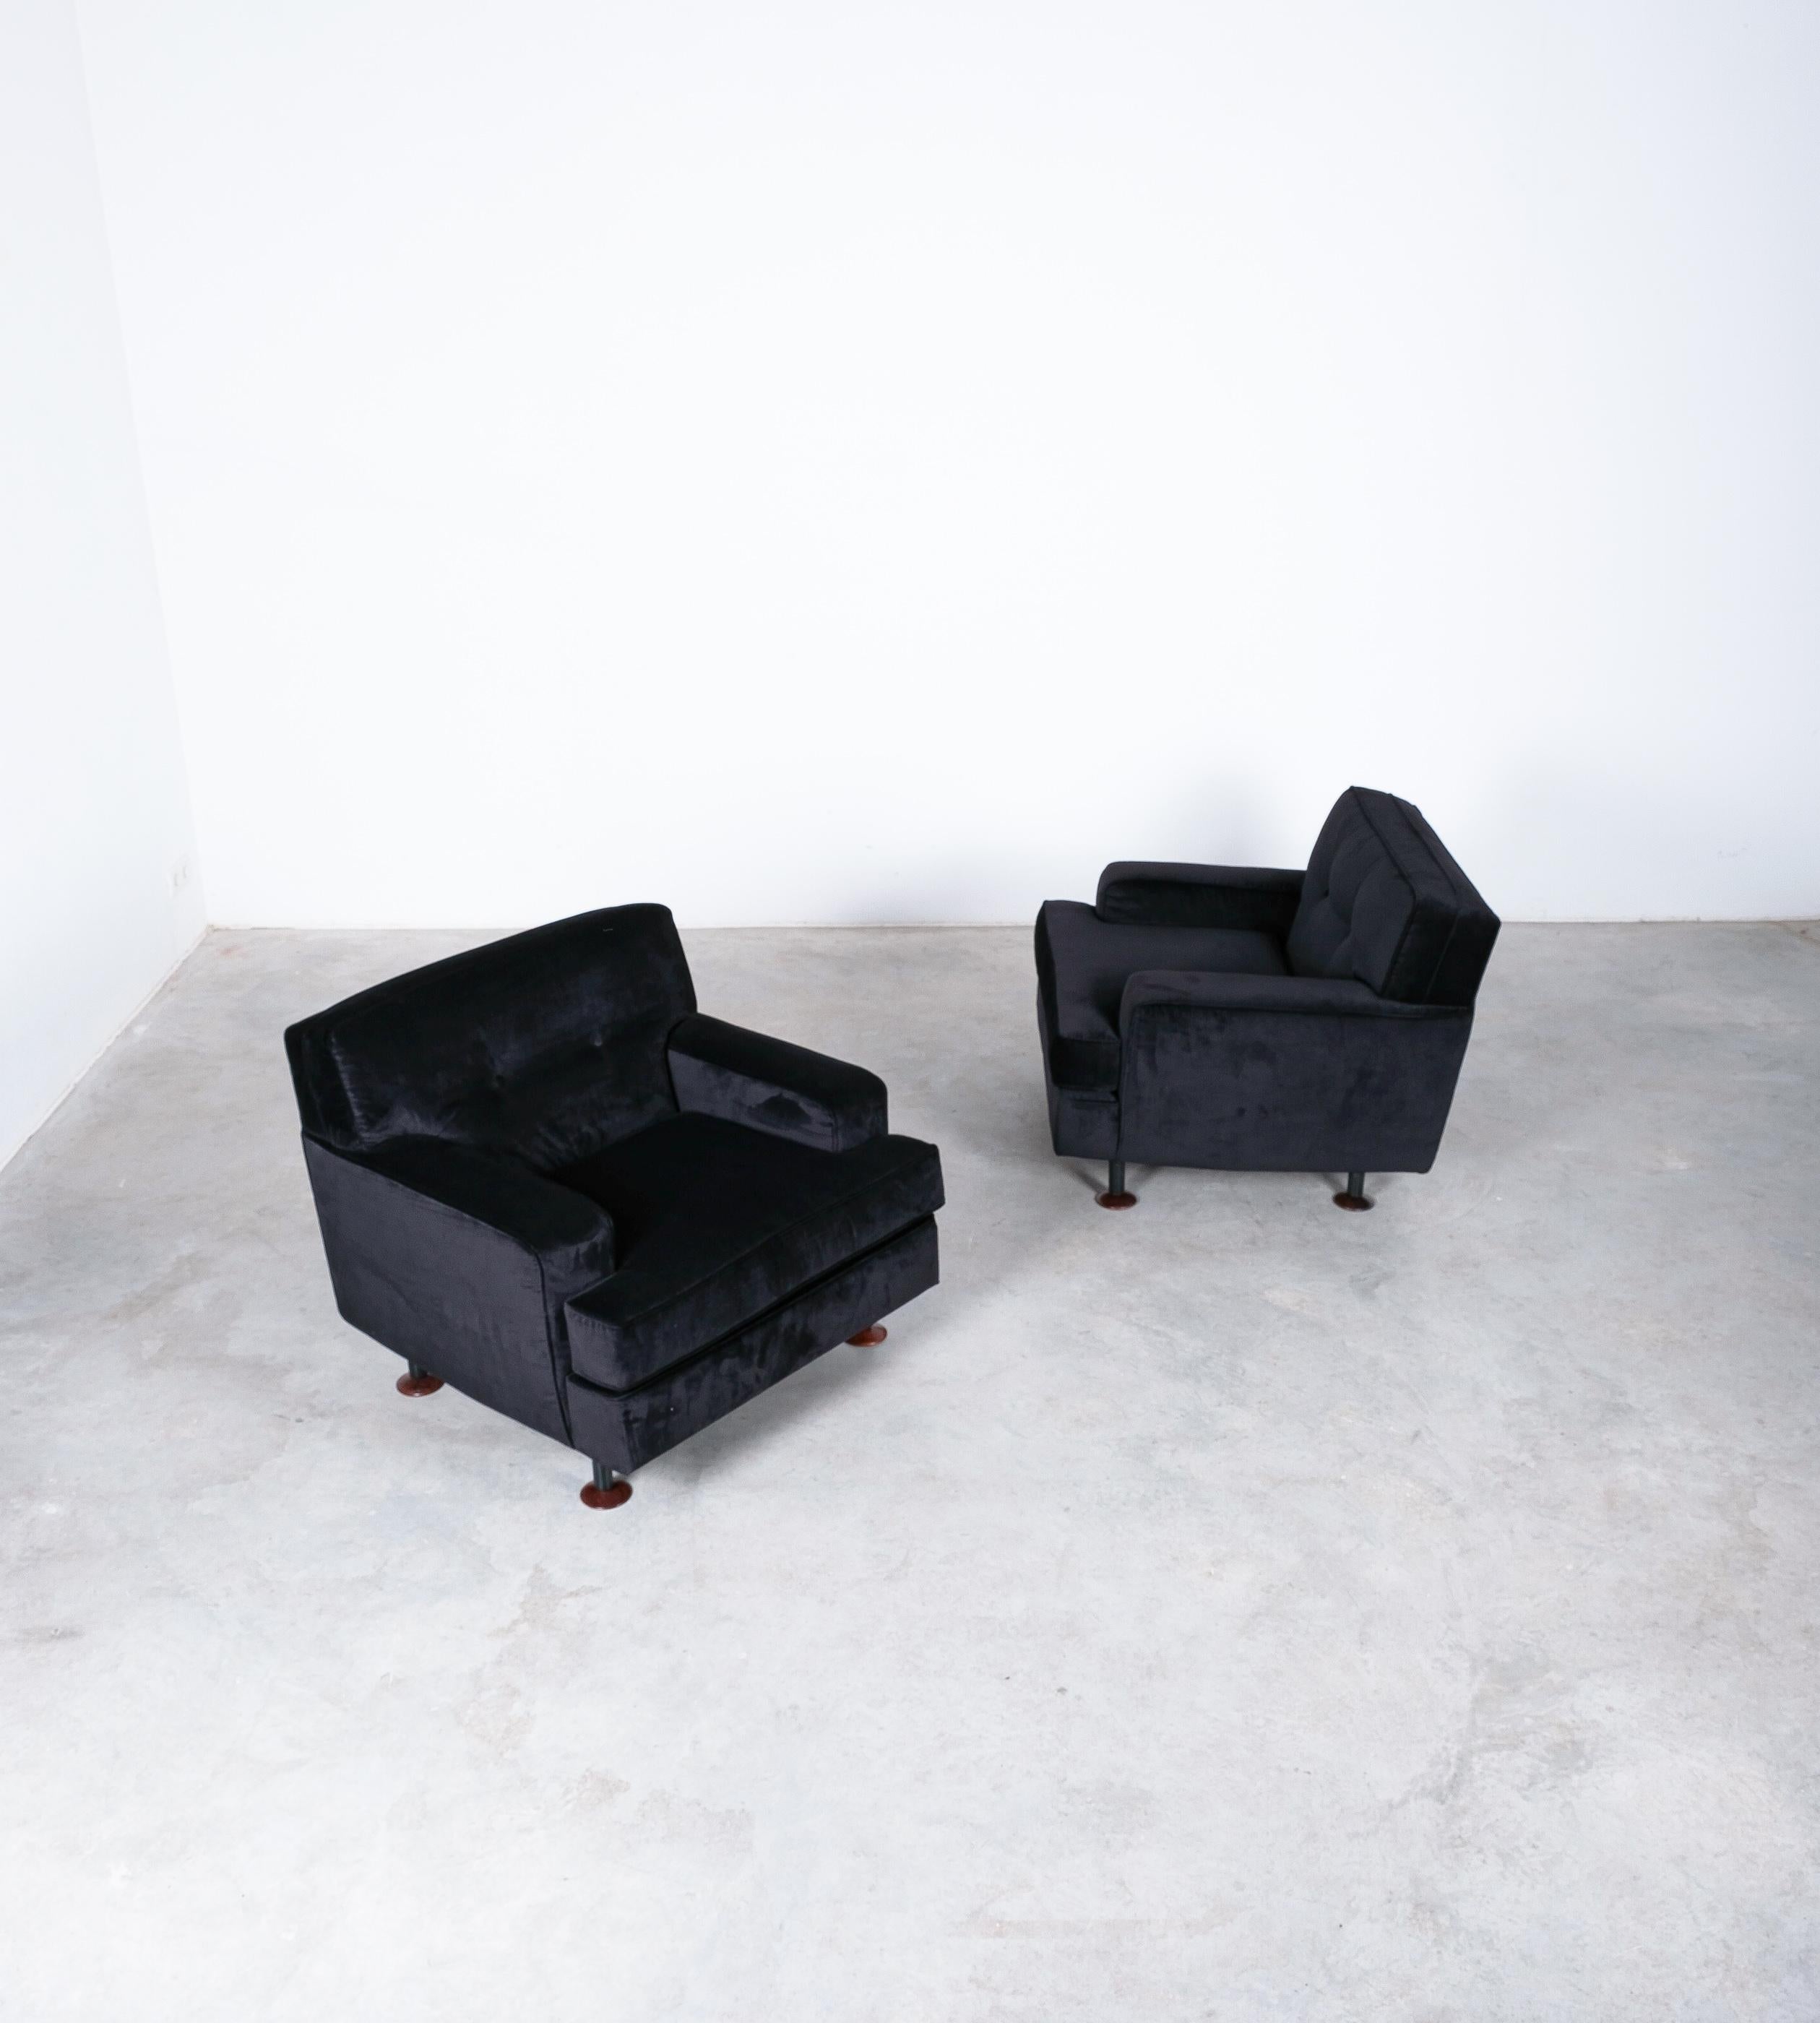 Marco Zanuso 'Square' black velvet chairs with, Italy circa 1955

Very stylish club chairs in amazing condition, very comfortable and upholstered in black velvet. Please watch the video to get a better feel for this chair, as black velvet is hard